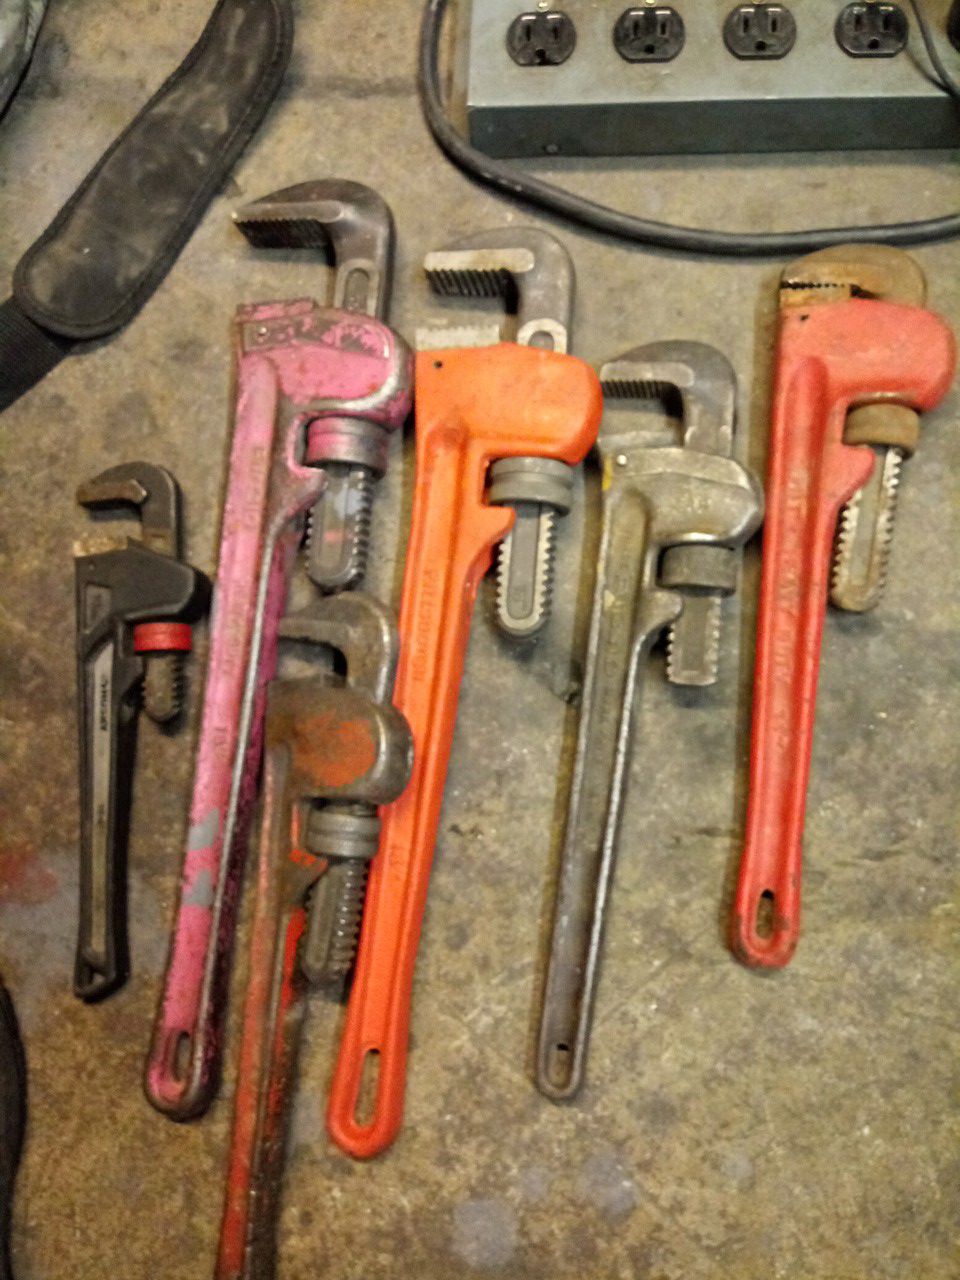 Pioe wrenches